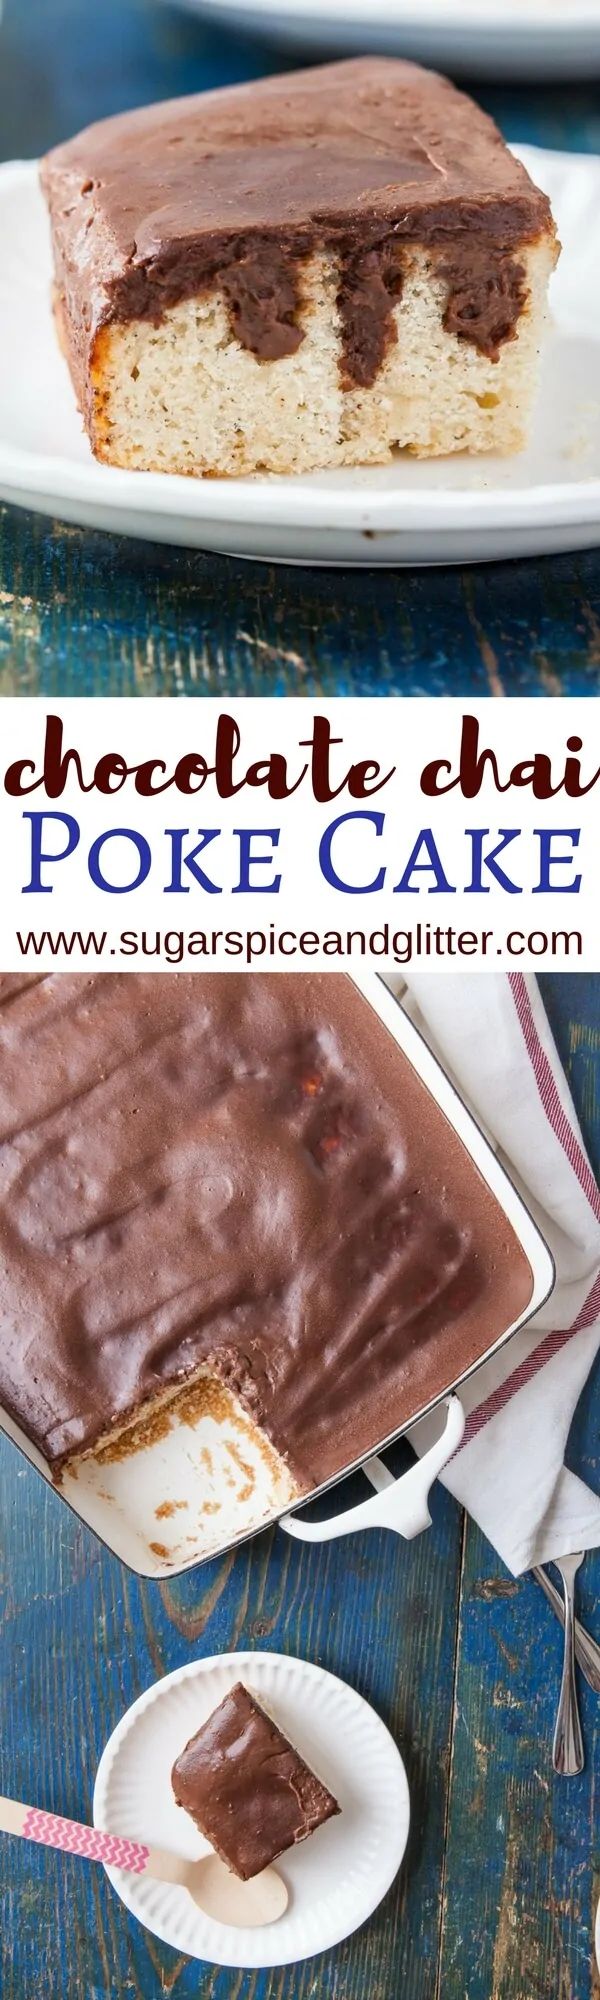 If you love unique chai recipes you're going to love this Chocolate Chai Poke Cake recipe with easy chocolate ganache and spiced vanilla cake. Chocolate Cardamom Poke Cake